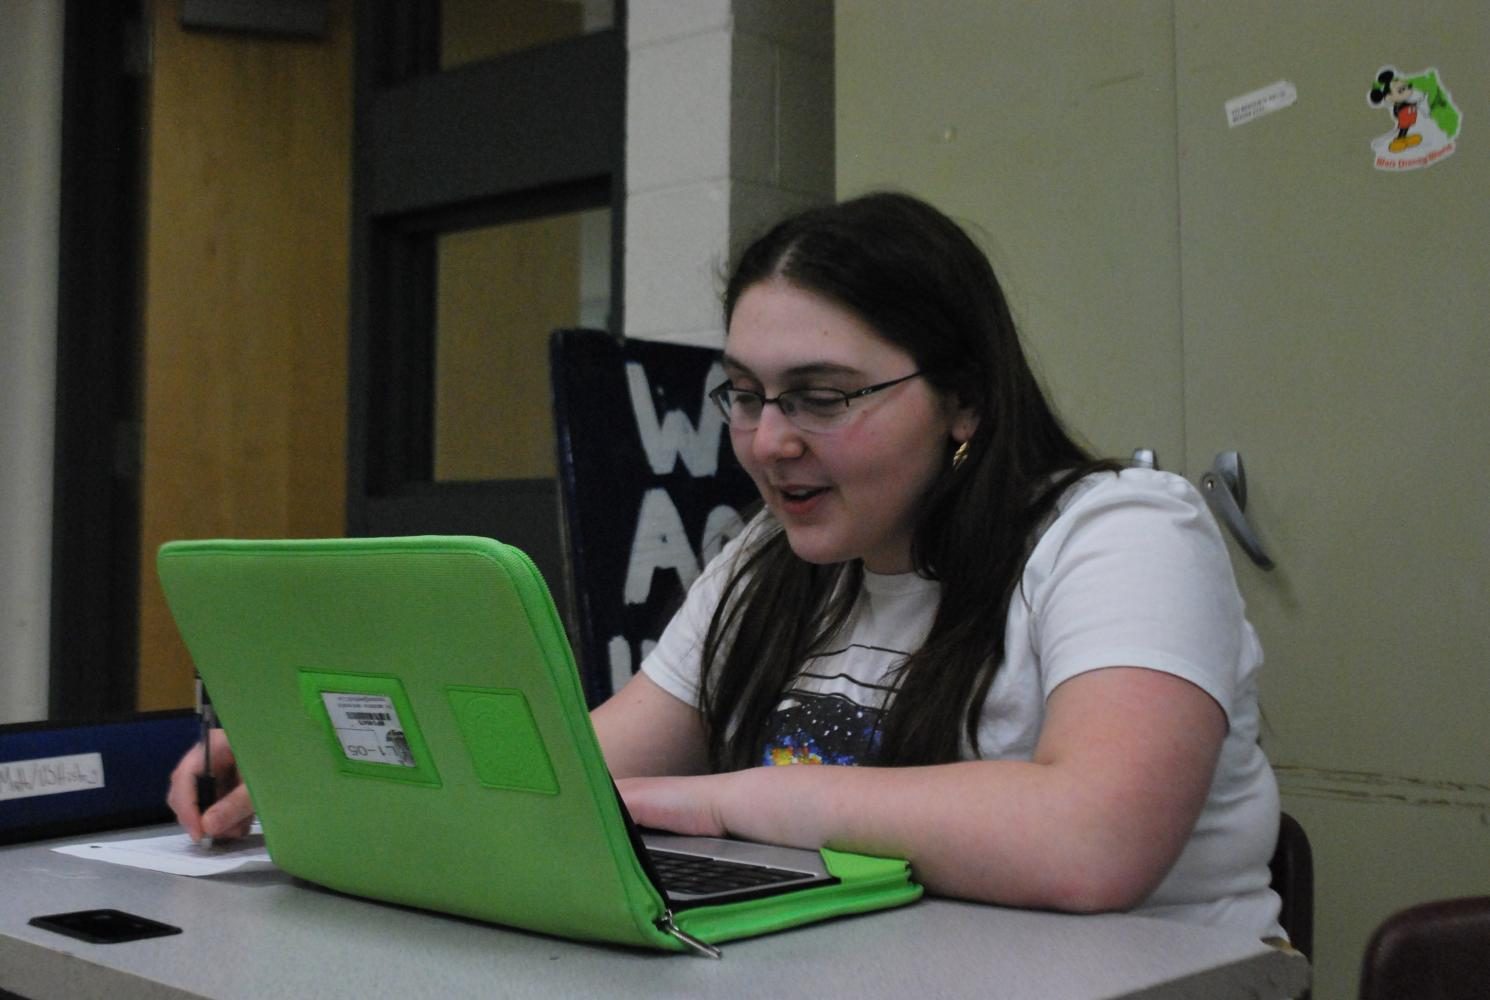 Junior Naomi Szabo-Wexler uses a Chromebook from the loaner station.